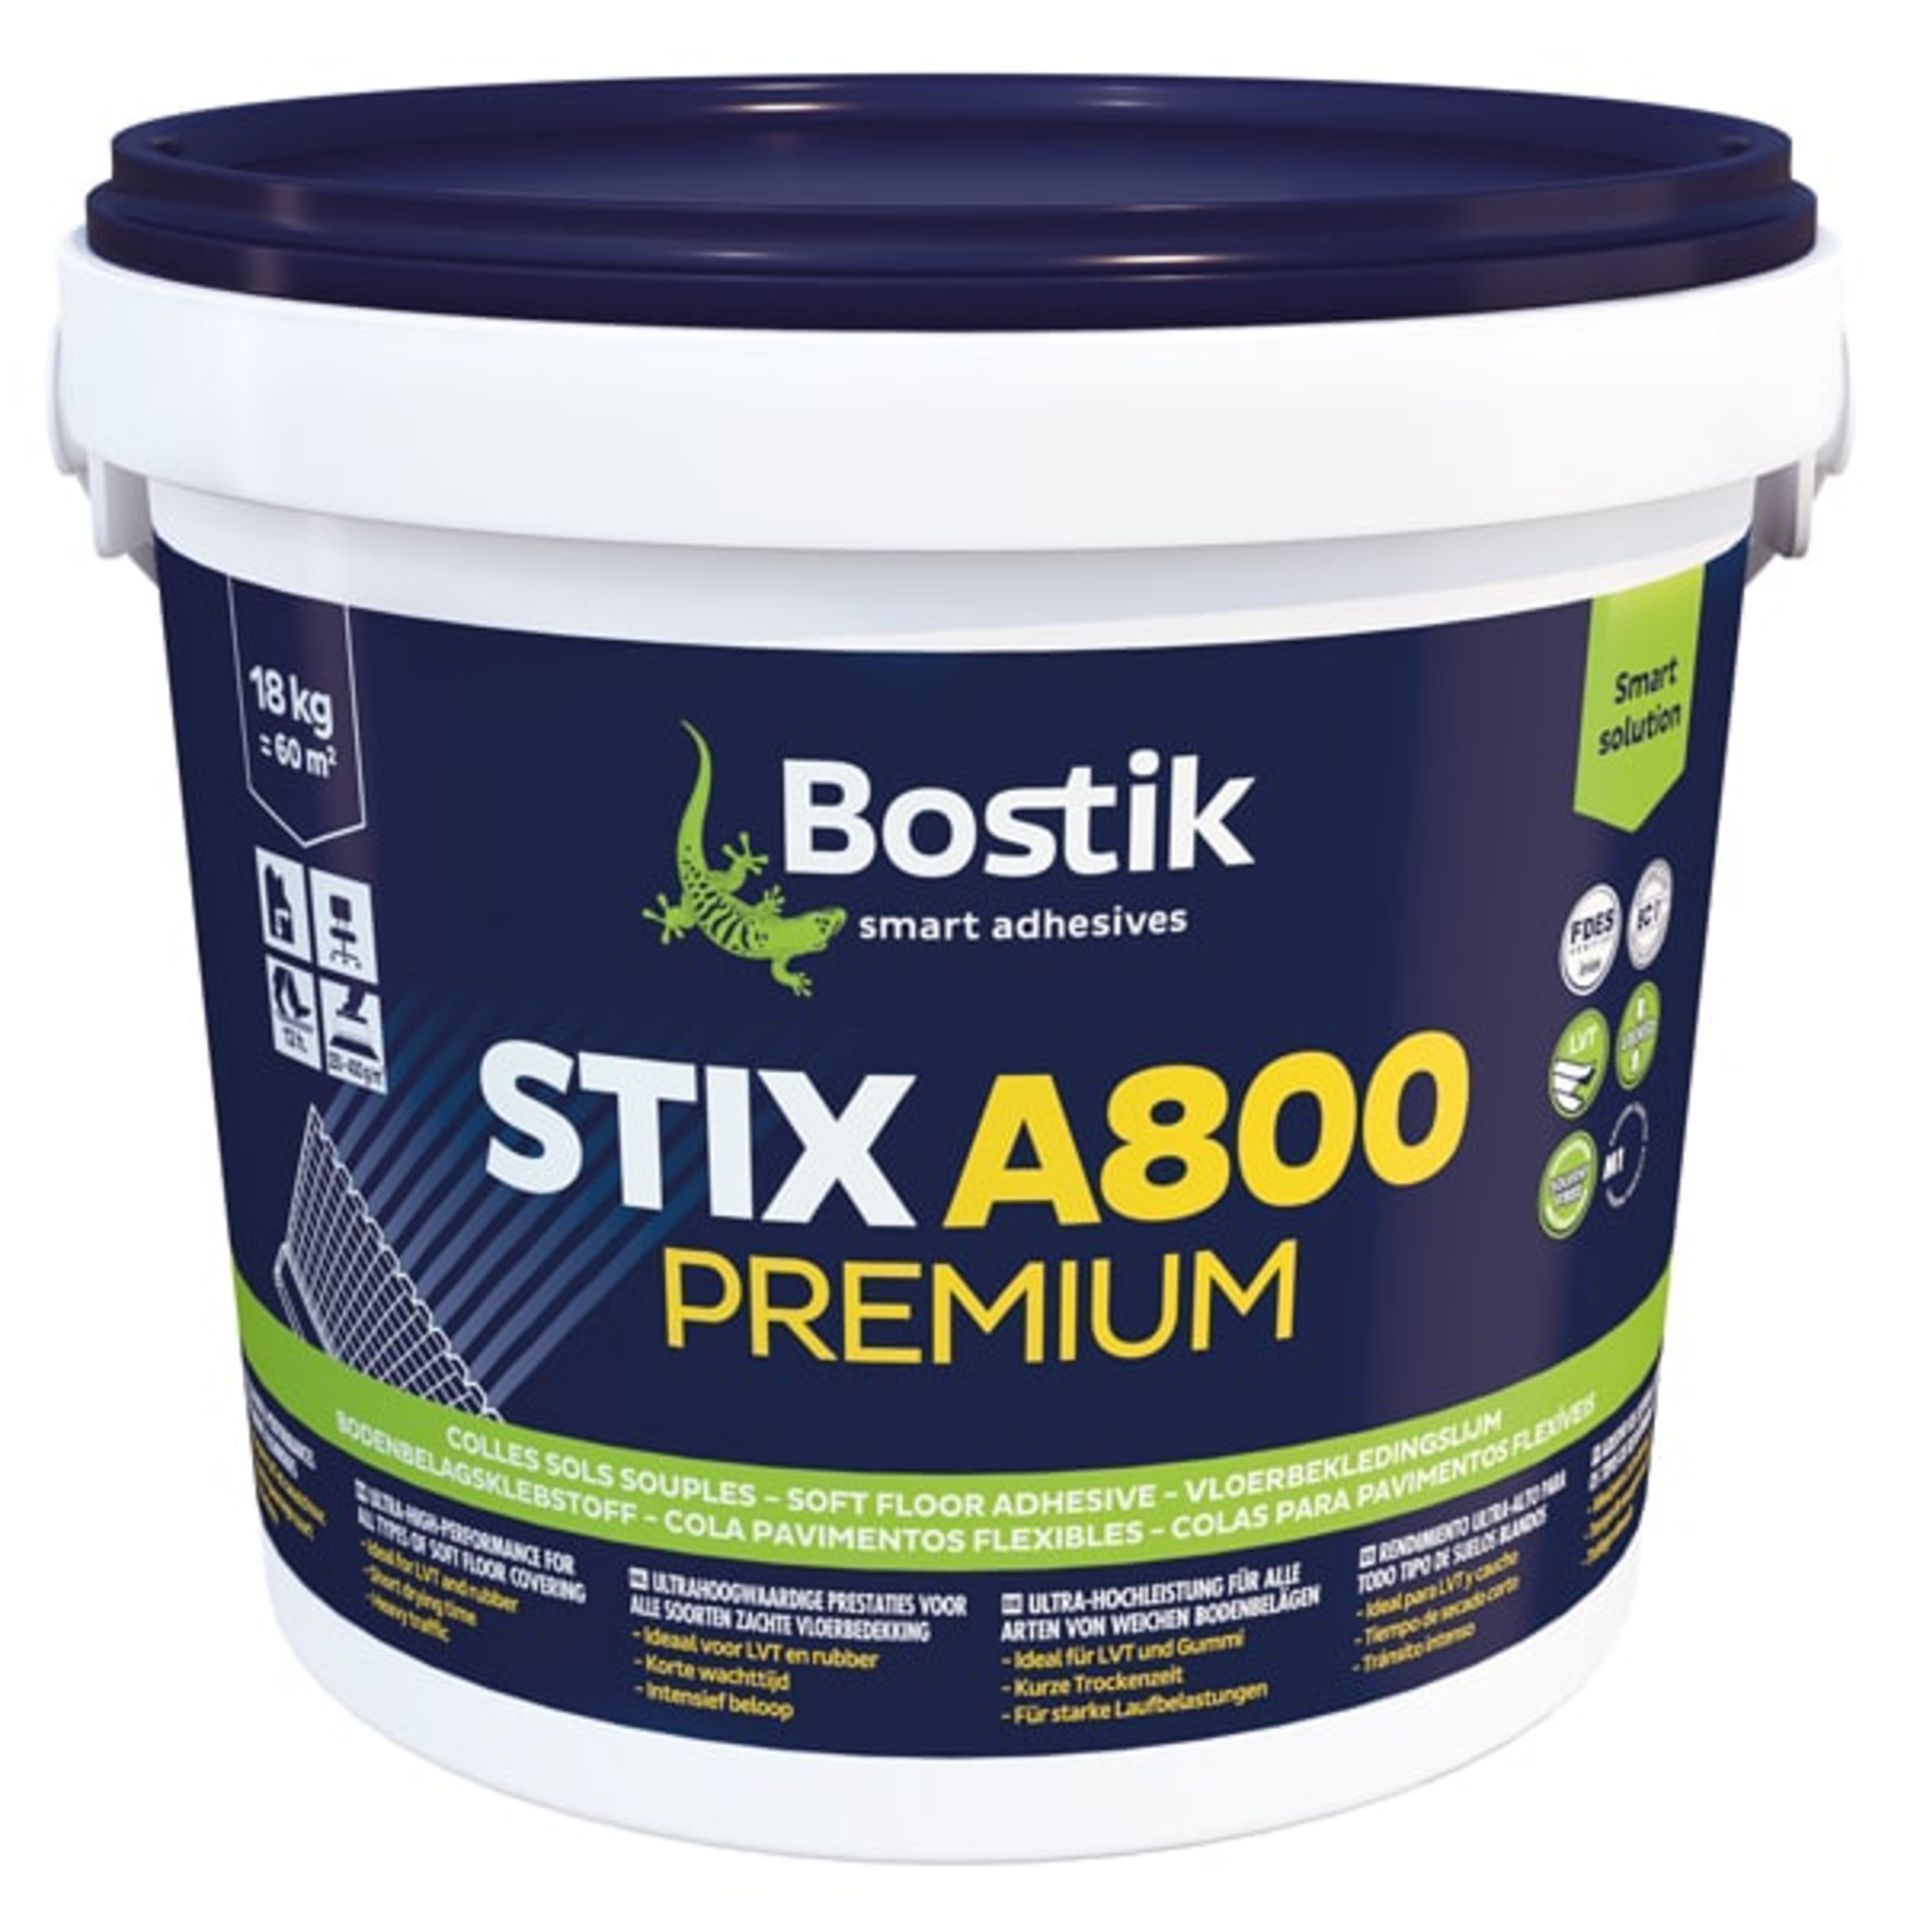 4 x New 18KG Tubs of Bostik Stix A800 Premium Ultra high performance acrylic adhesive for all